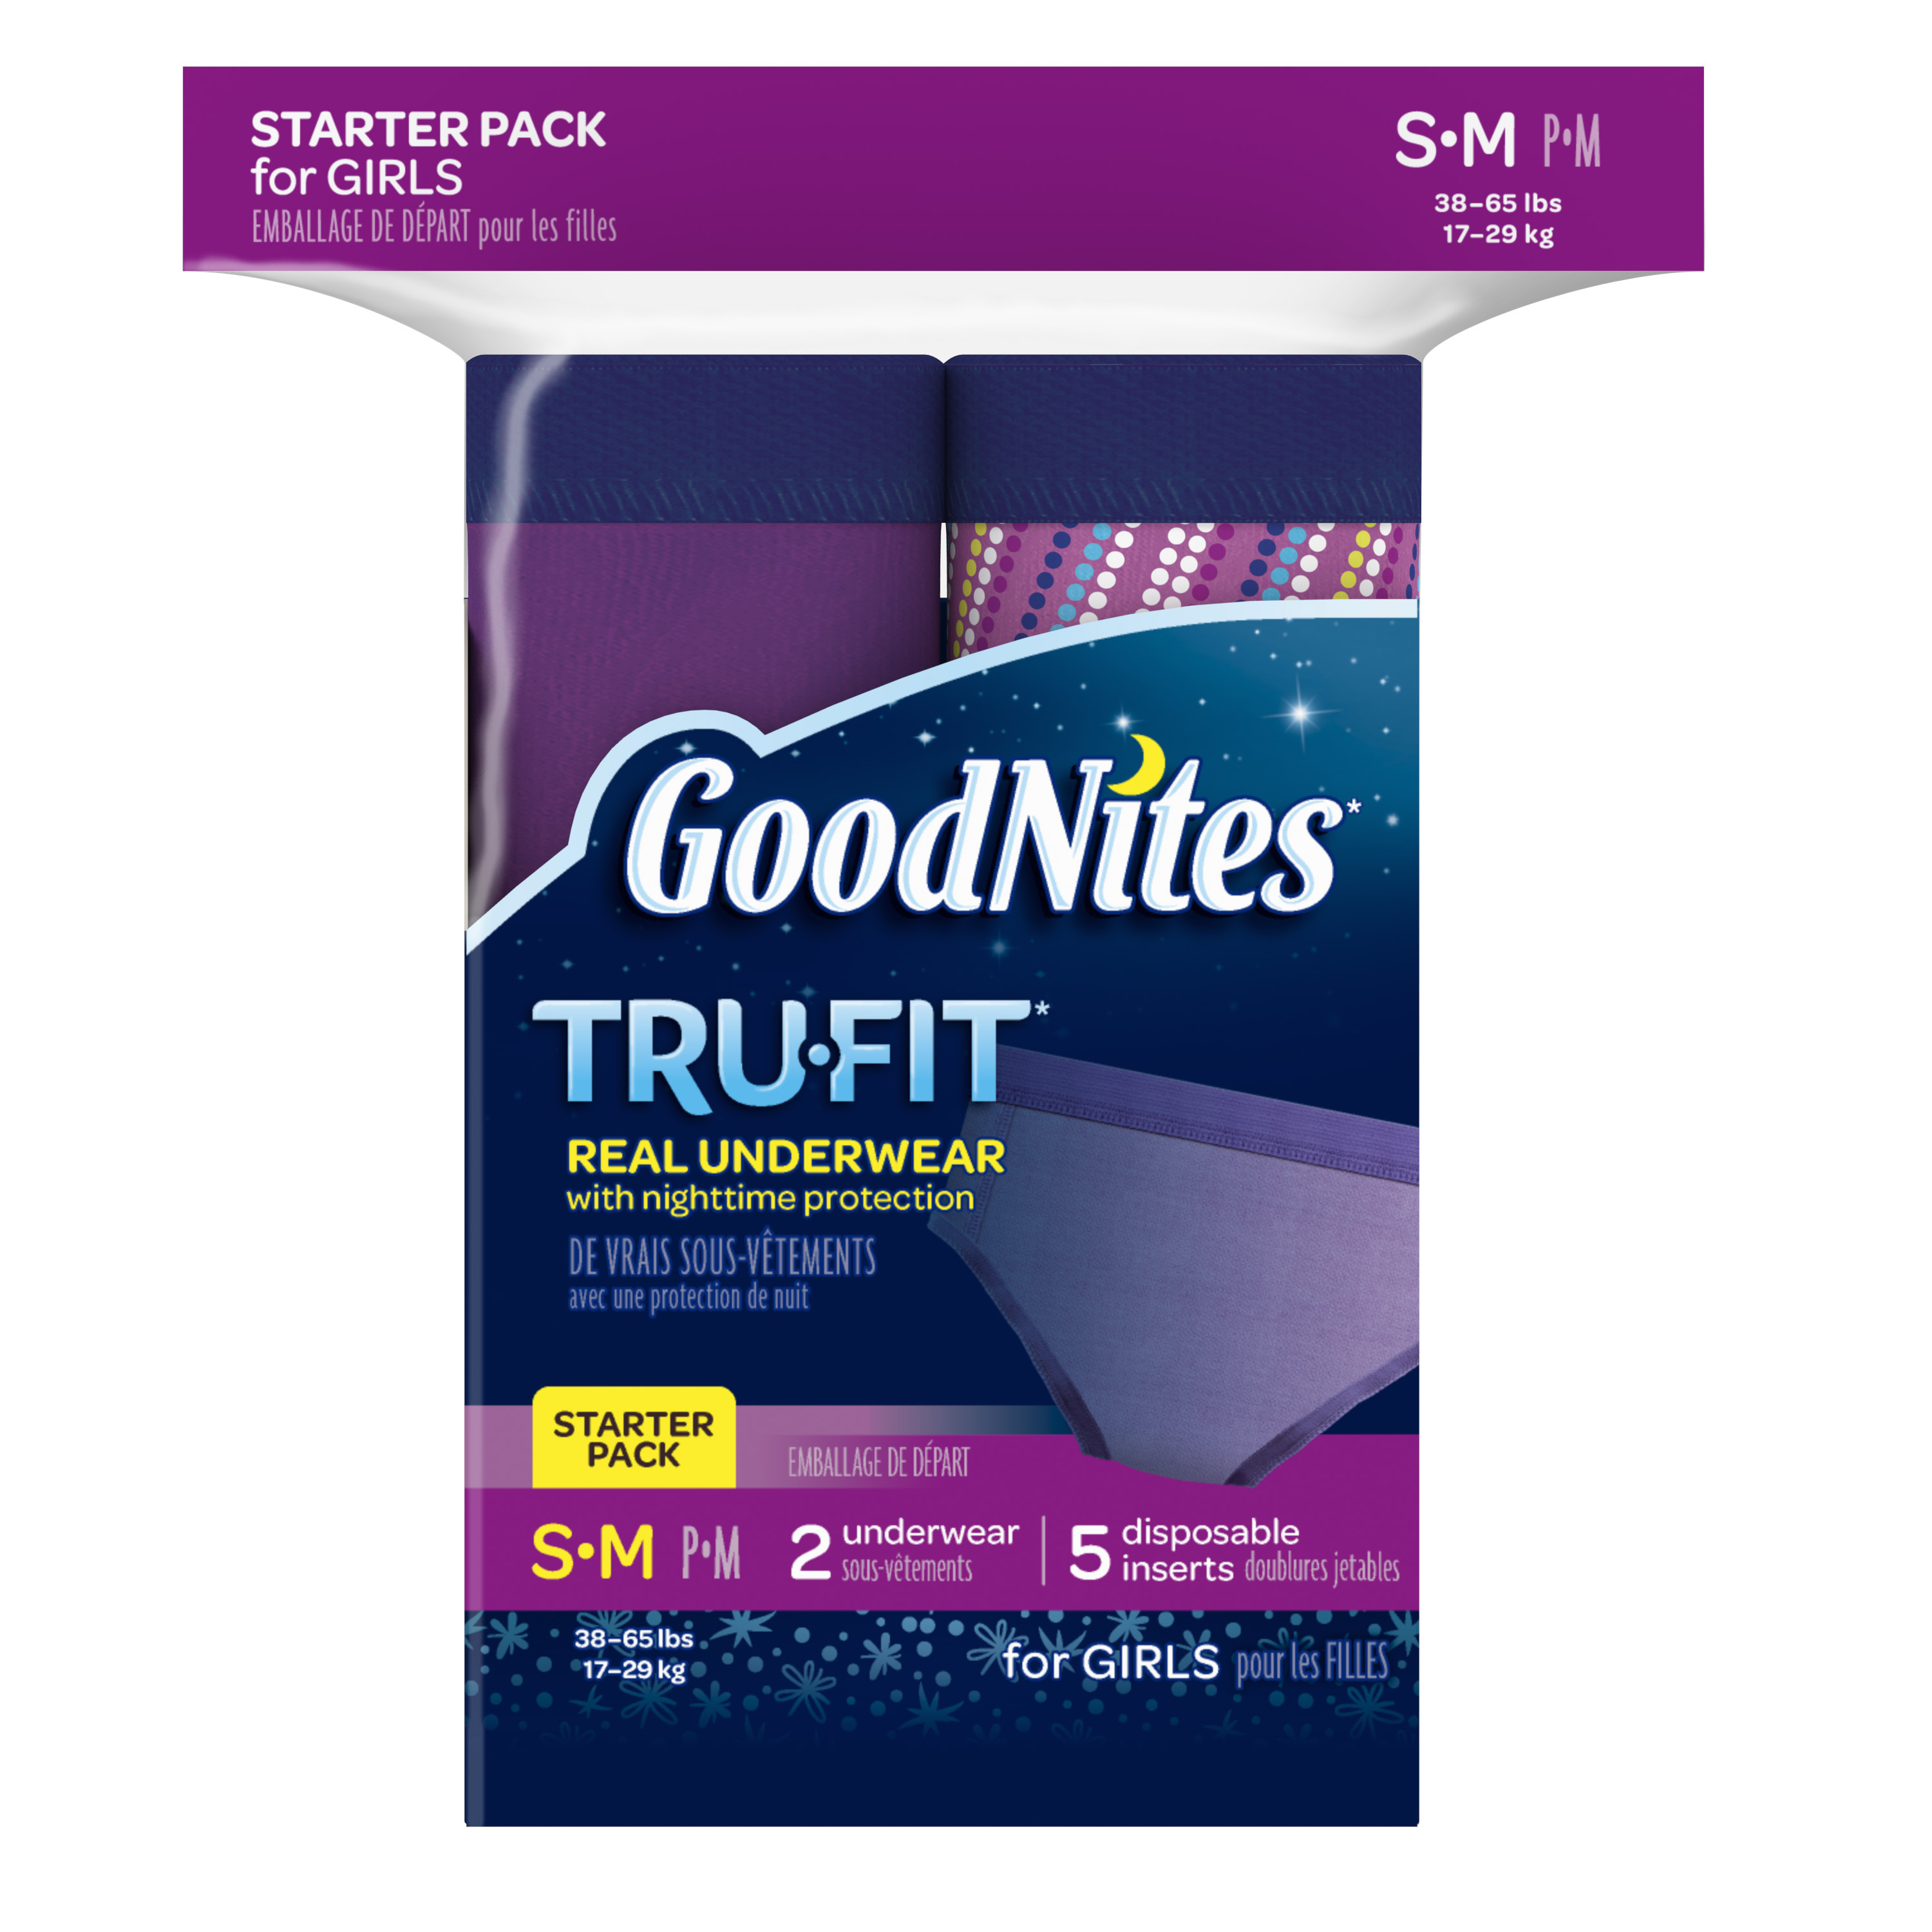 GoodNites Tru-Fit Bedwetting Underwear with Nighttime Protection Starter Pack for Girls, S/M, 7ct - image 1 of 6